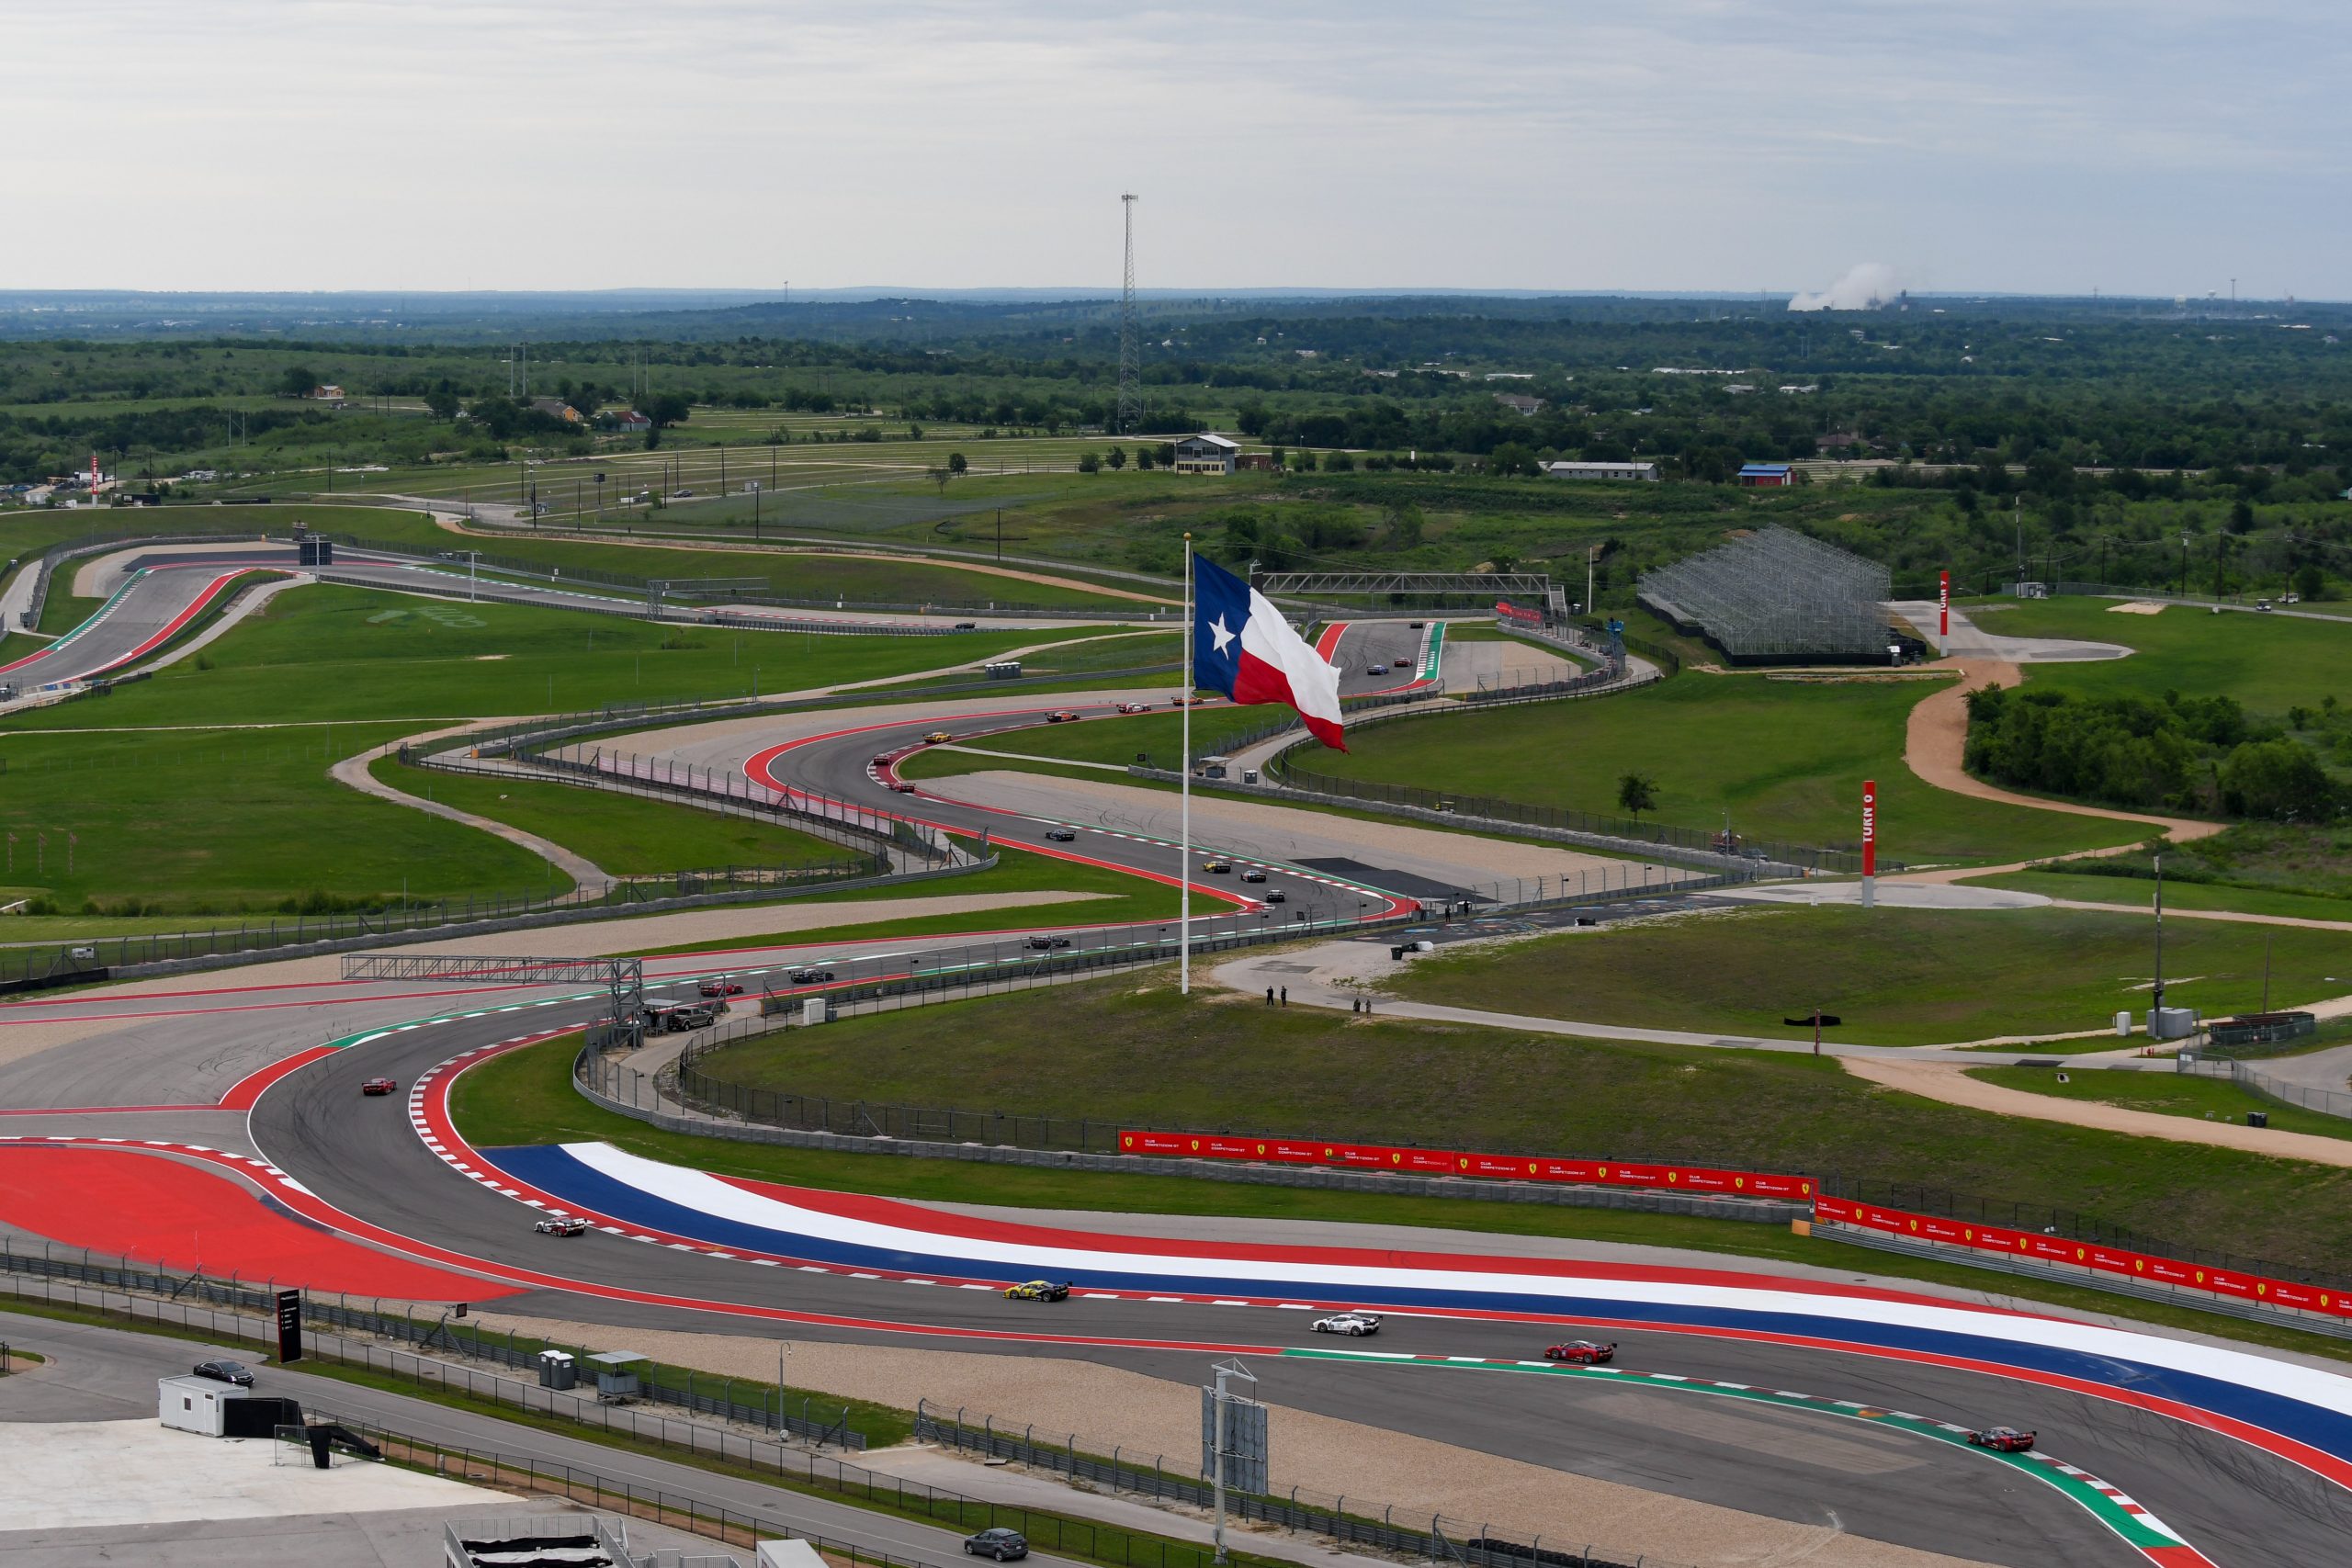 Circuit of the Americas may be in the midst of a racecourse renaissance according to John Arndt, Staff Writer and Photographer. (Photo: John Arndt | The Podium Finish)